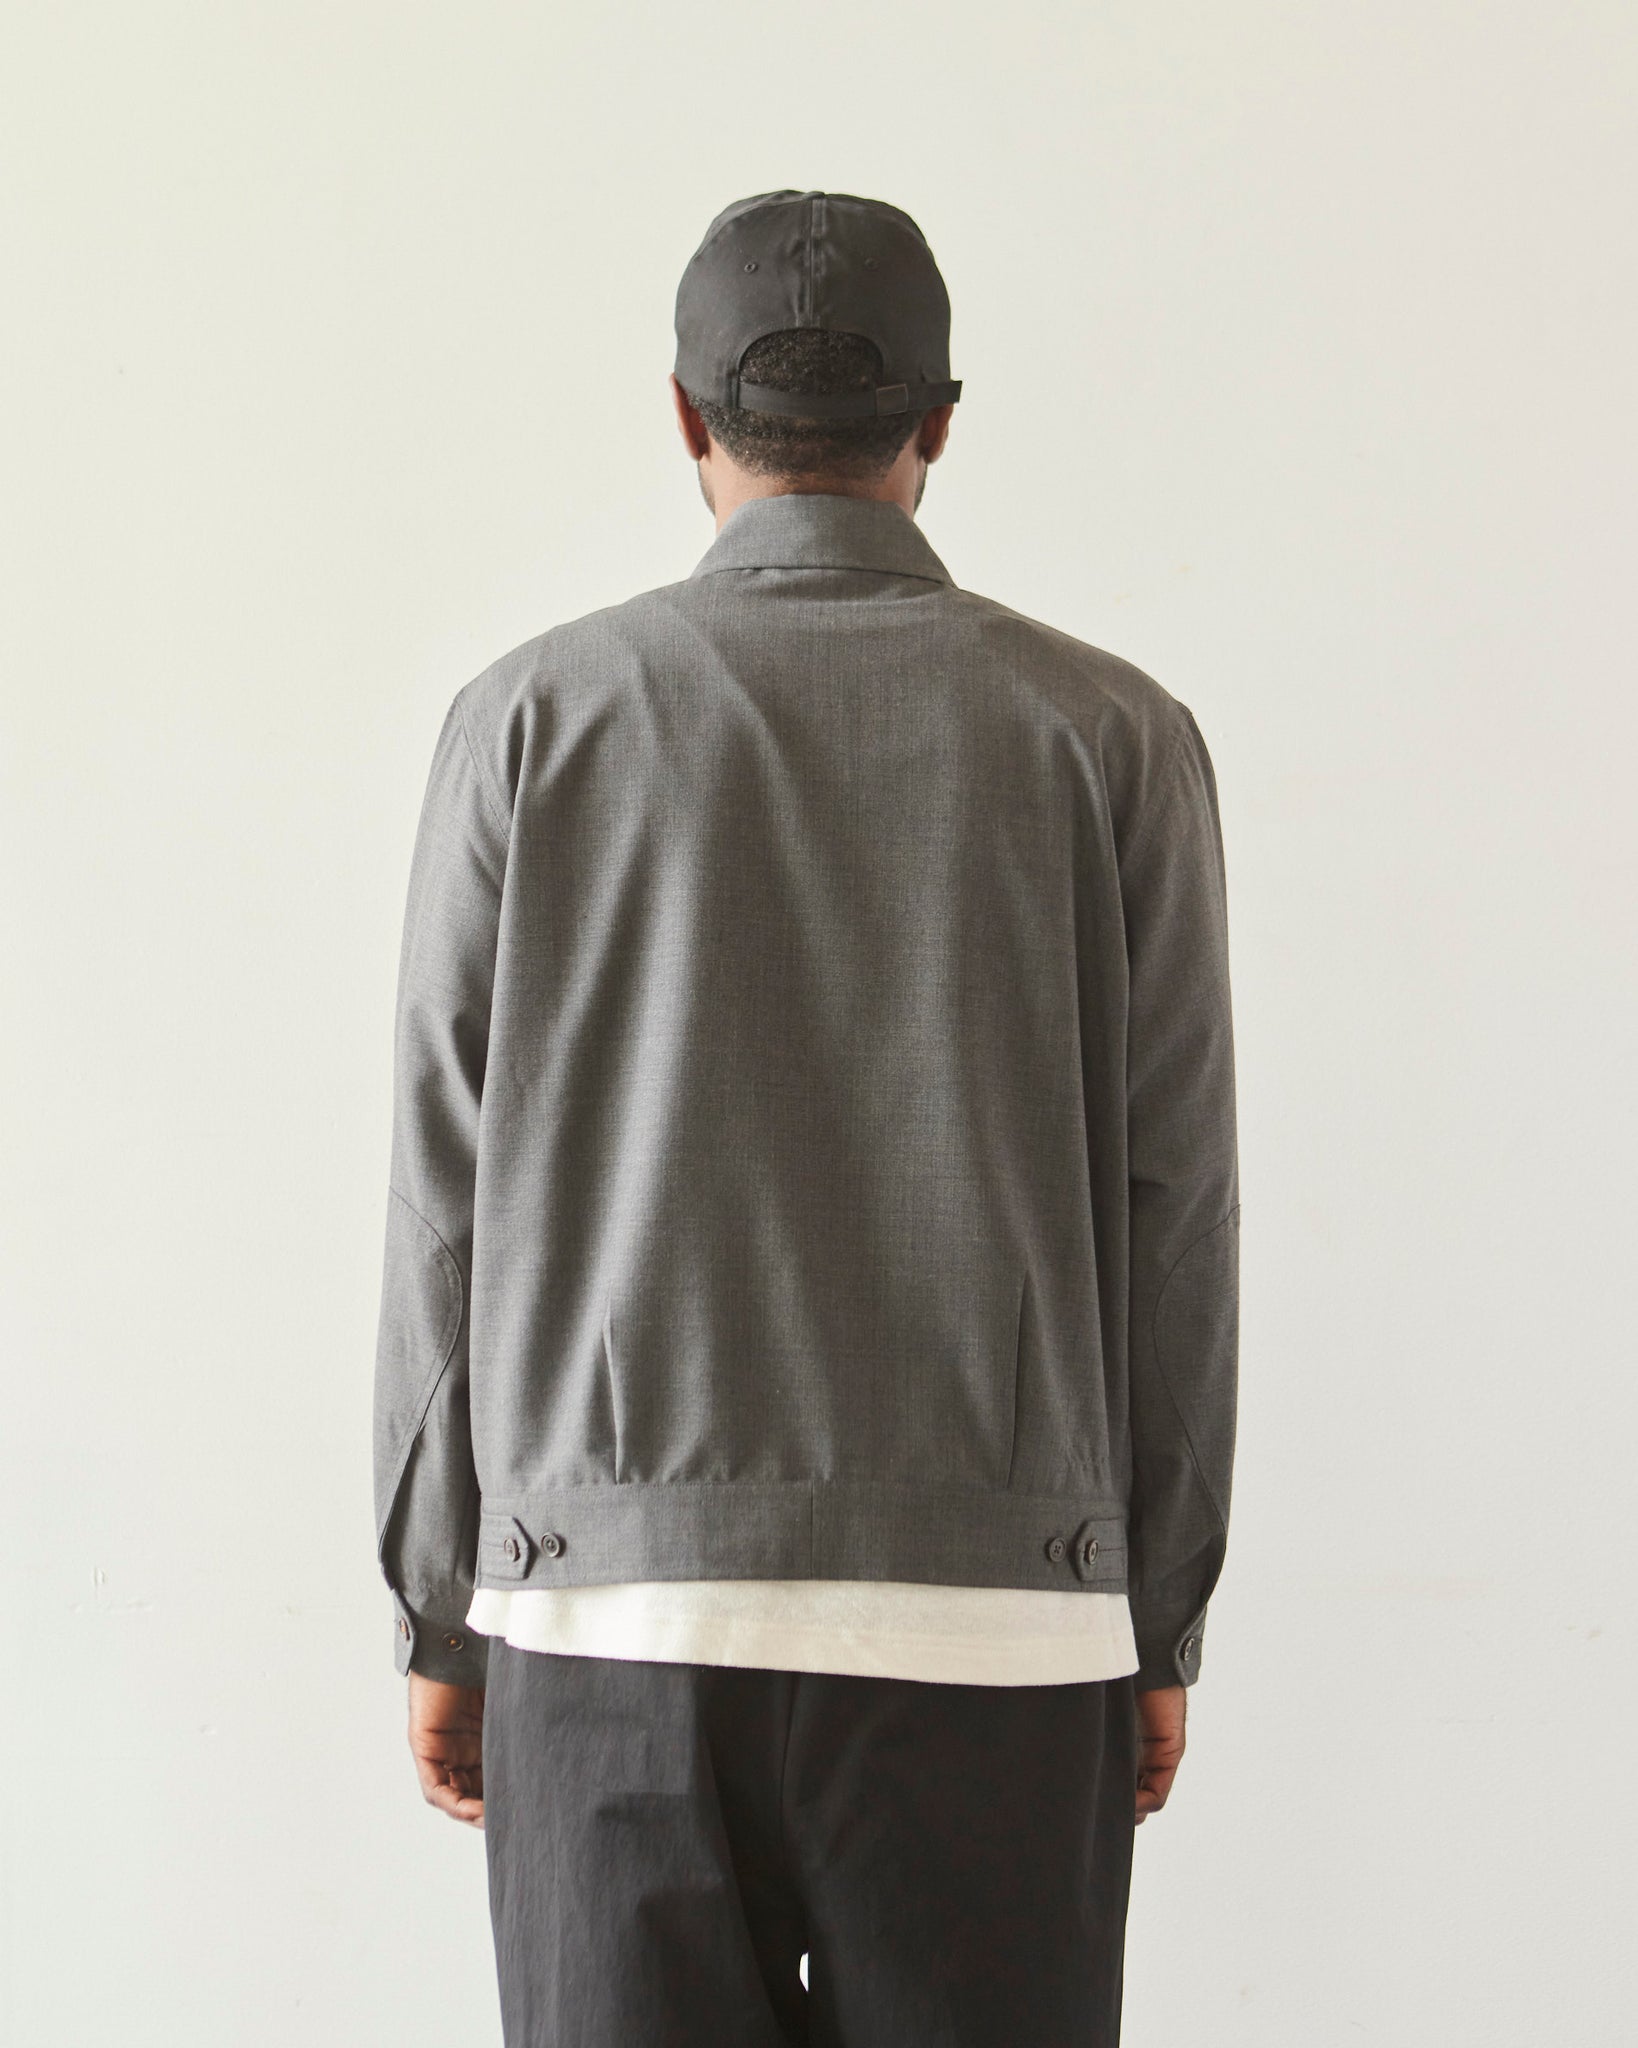 Universal Works E130 Jacket, Grey Tropical Suiting